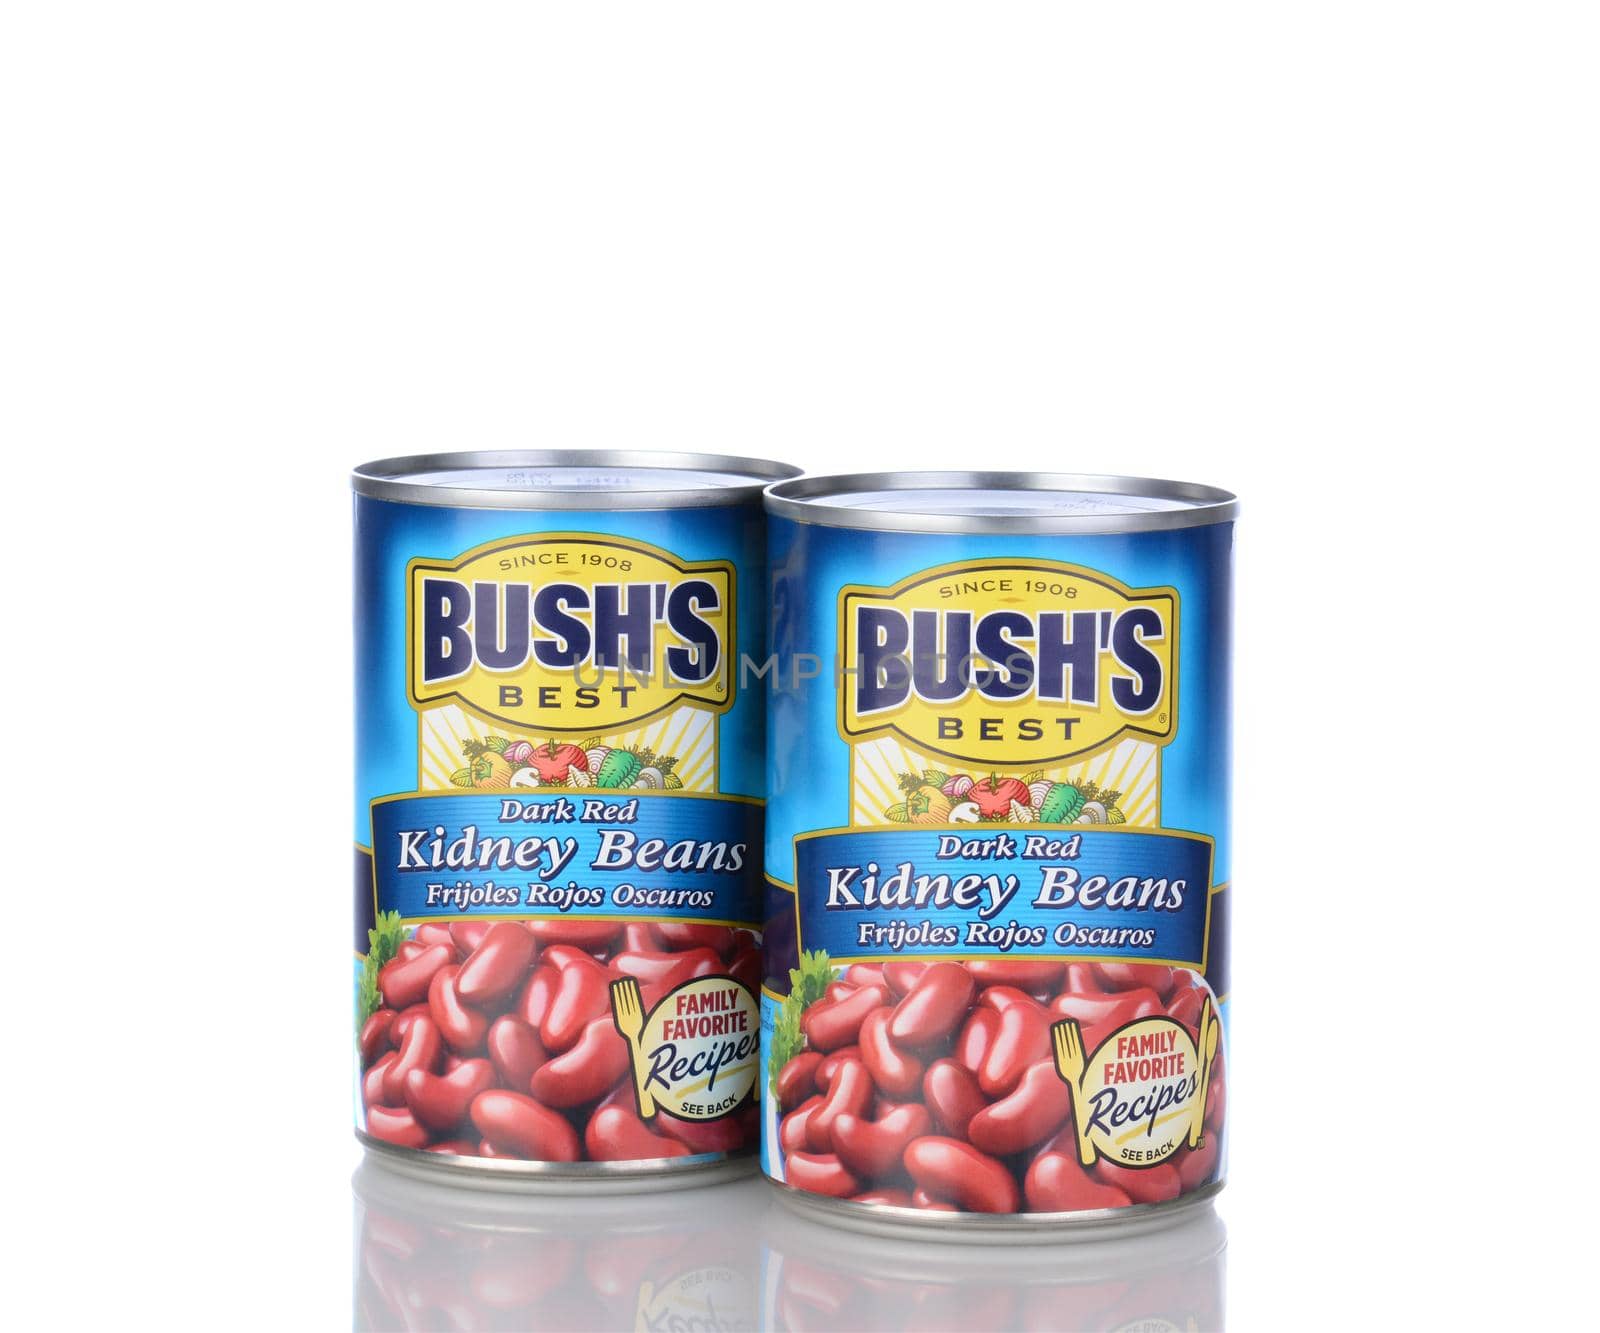 IRVINE, CA - January 05, 2014: Two cans of Bushs Dark Red Kidney Beans. Bush's has been canning beans since 1908, currently with a product line of over 40 items.